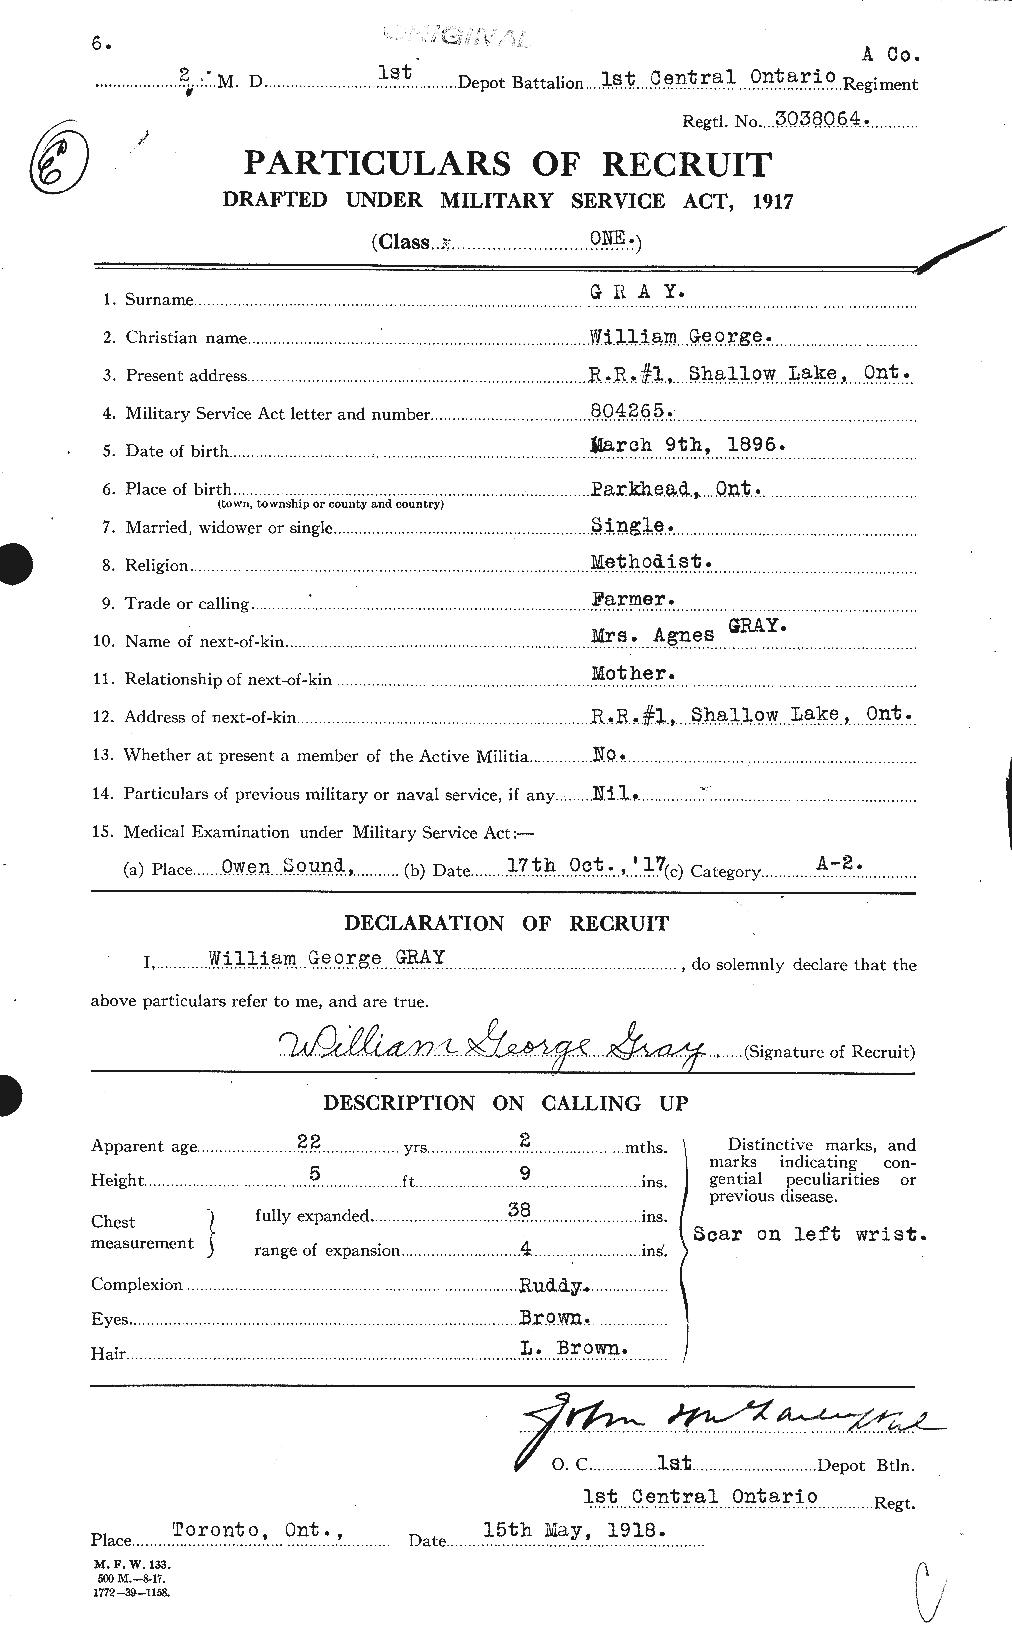 Personnel Records of the First World War - CEF 361821a